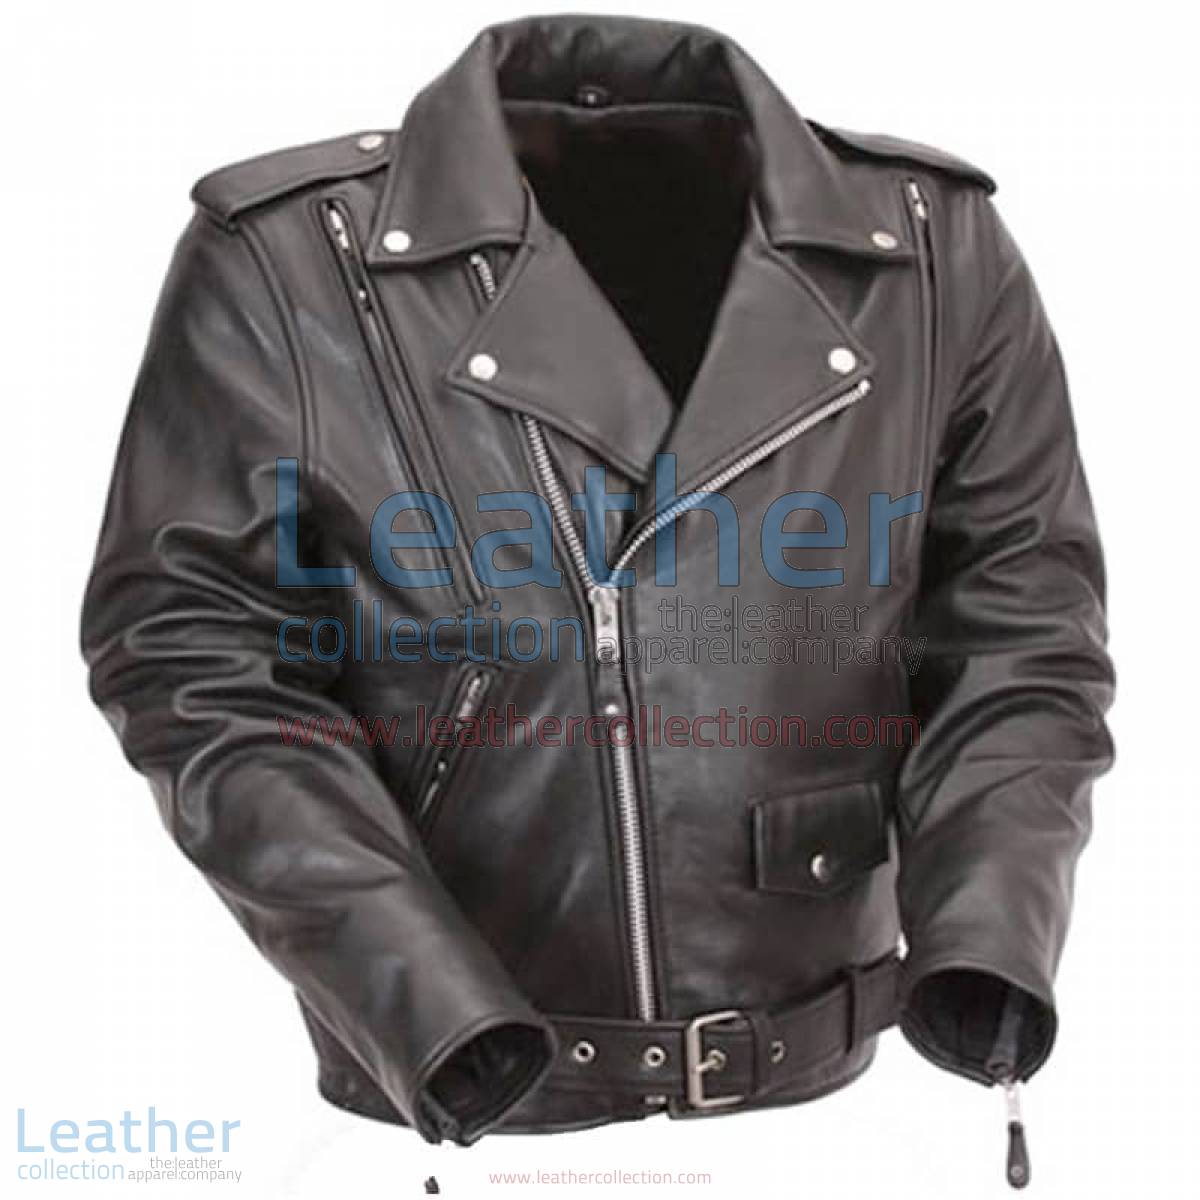 Black Leather Motorcycle Jacket with Exclusive Built-in Back Support | leather motorcycle jacket